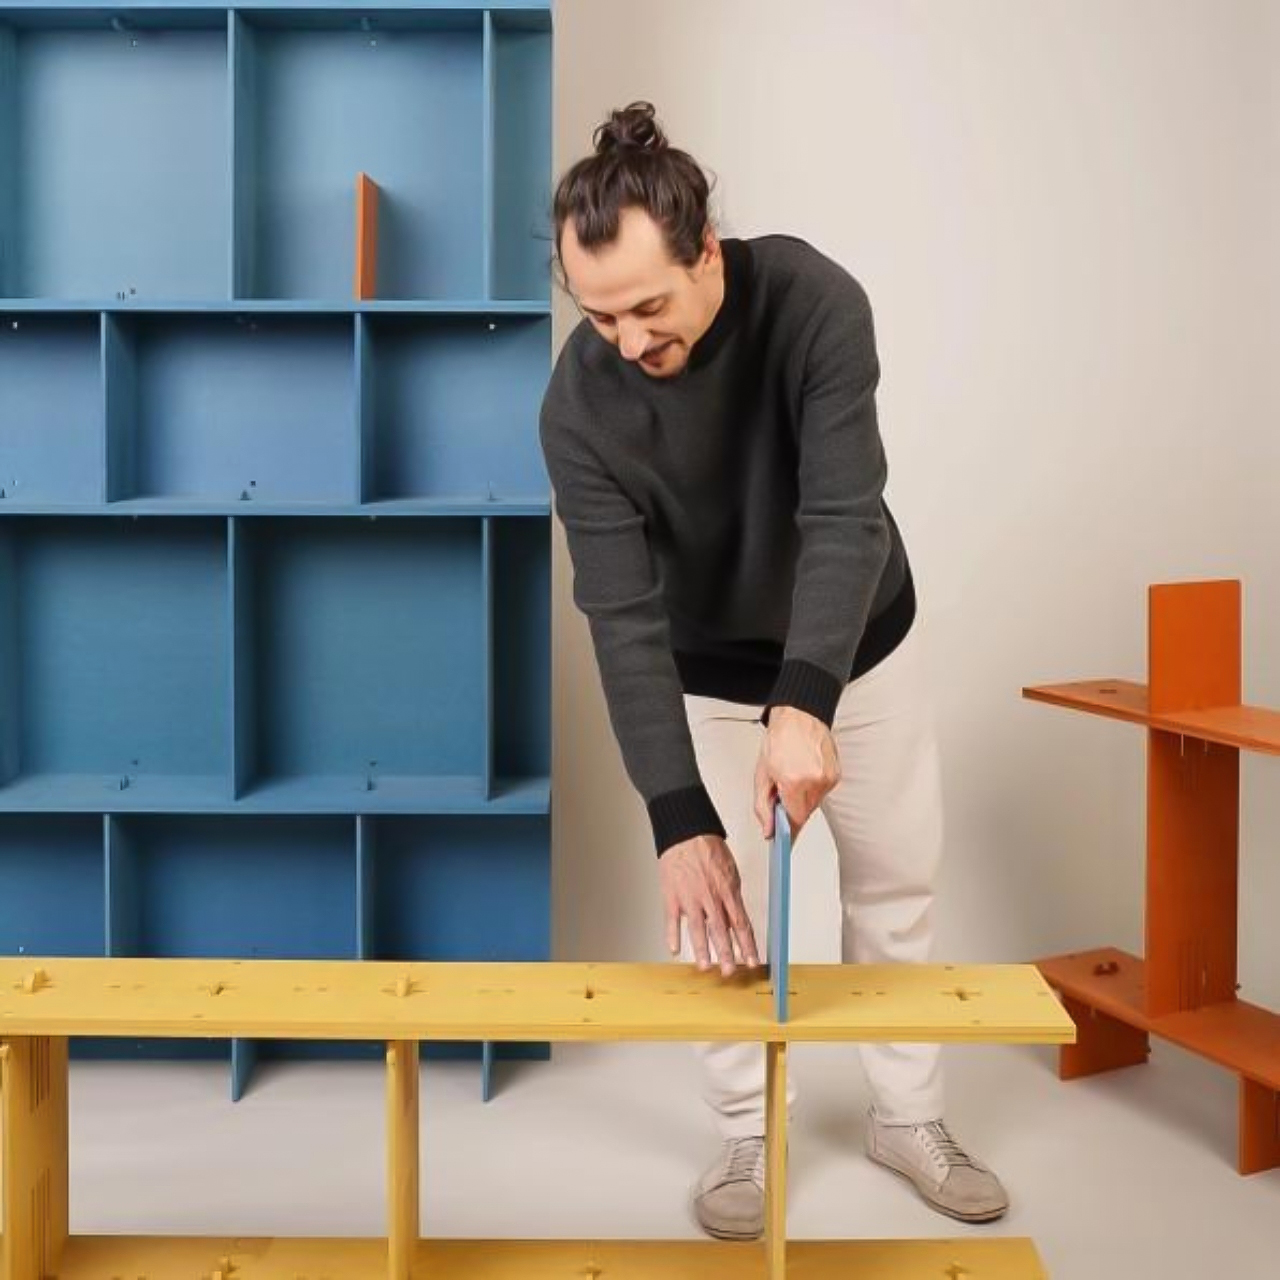 Create furniture with this experimental wooden clip system - Yanko